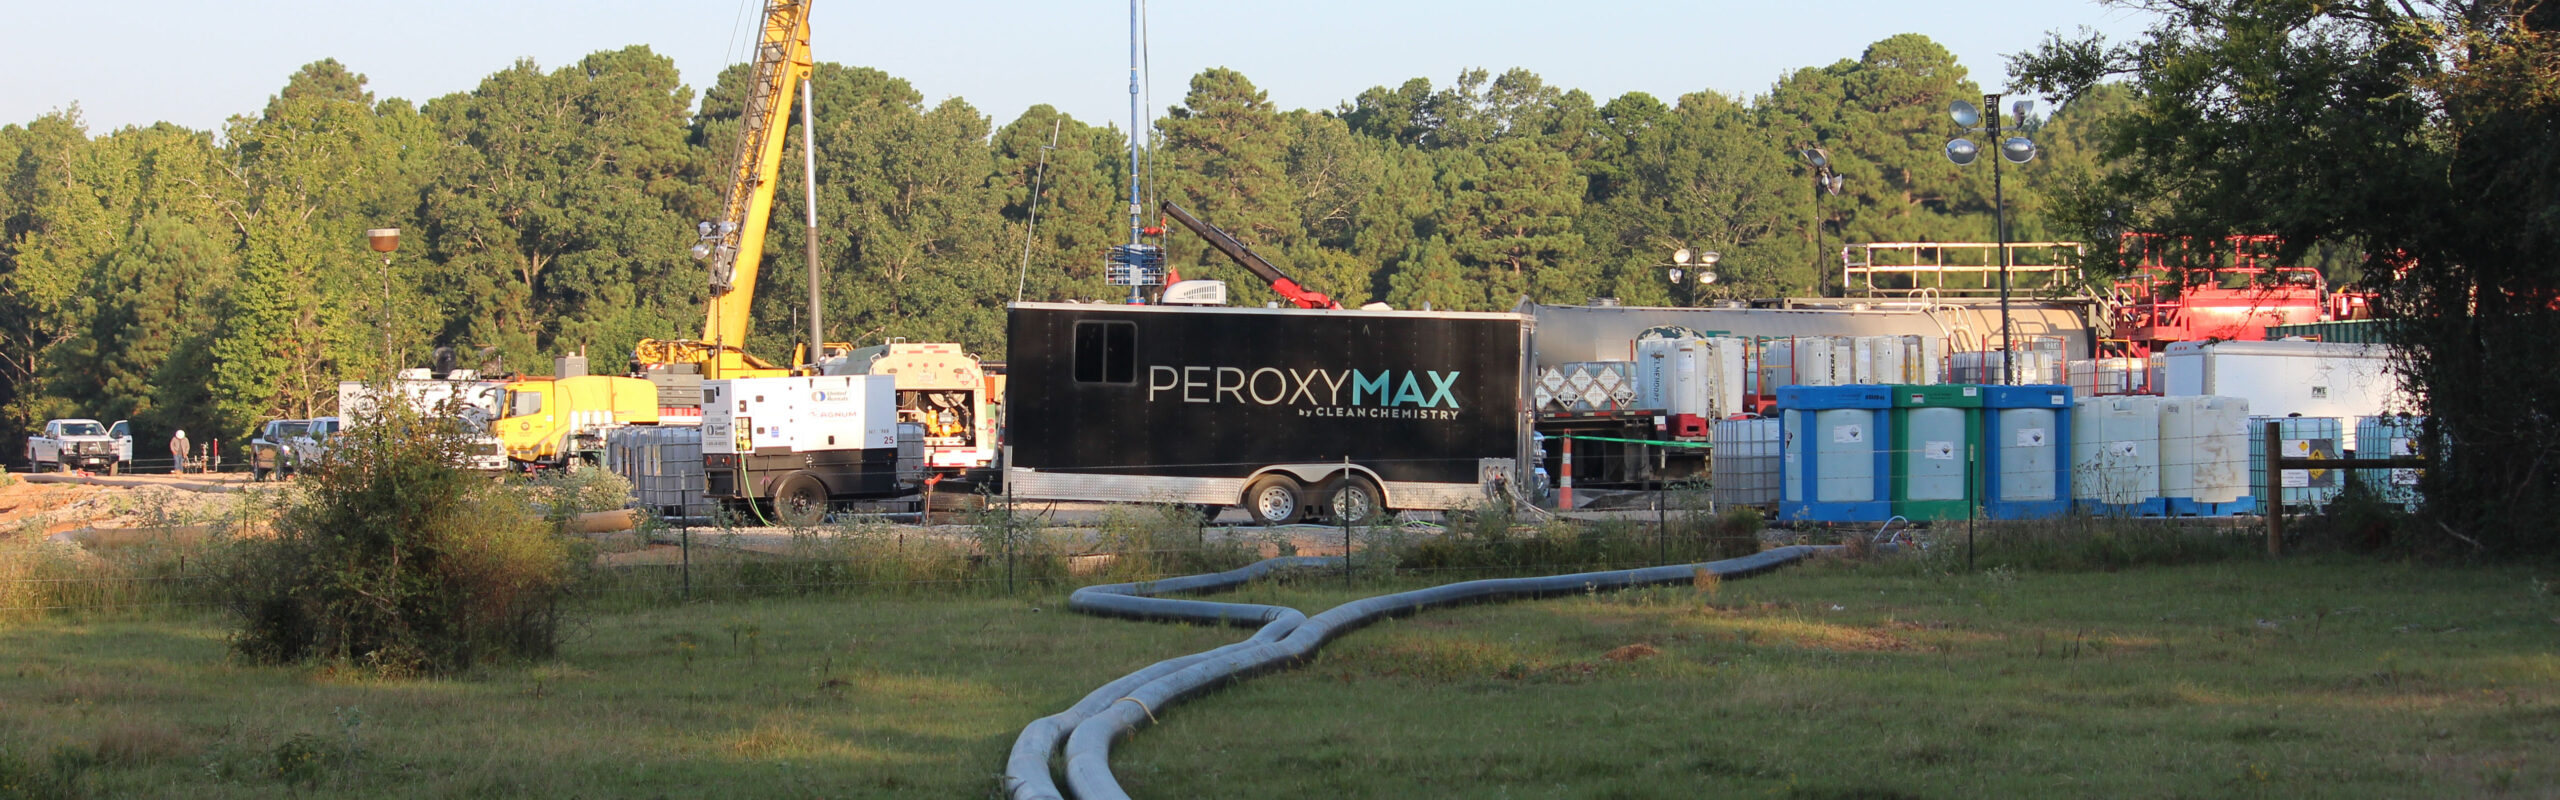 A treatment trailer sits in a field during sunset at a hydraulic fracturing site